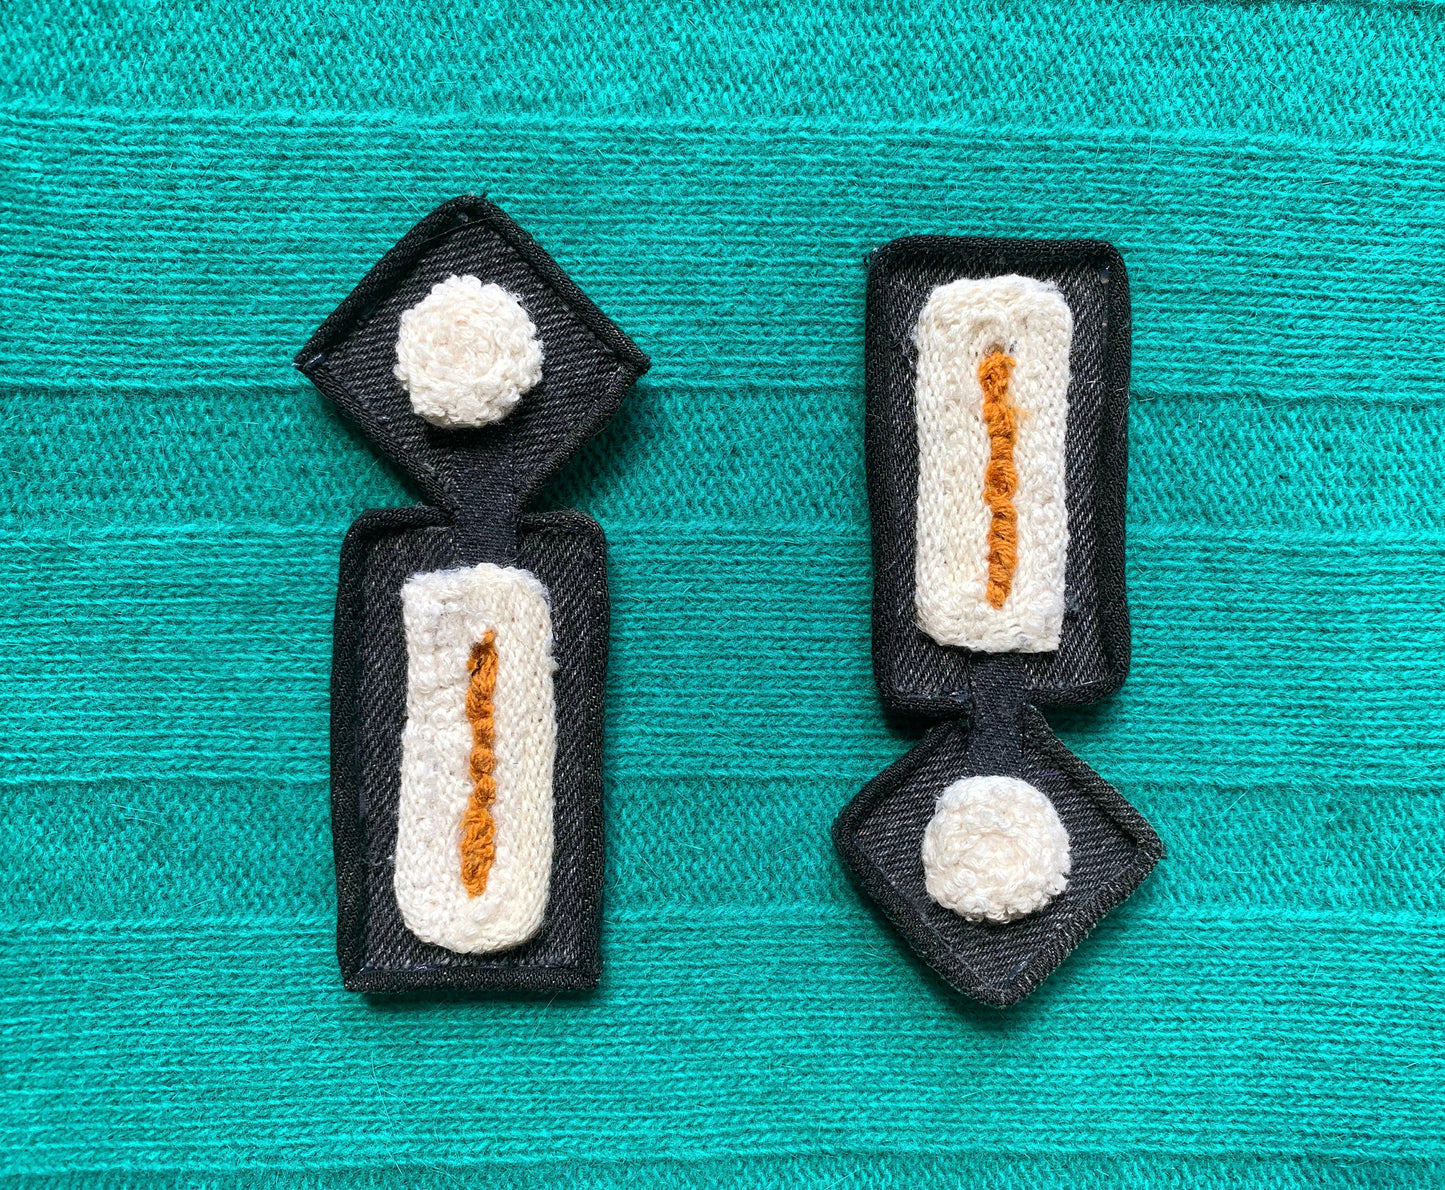 Black White Yellow Graphic Rectangle Earrings - from Recycled Sweater Fibers & Denim